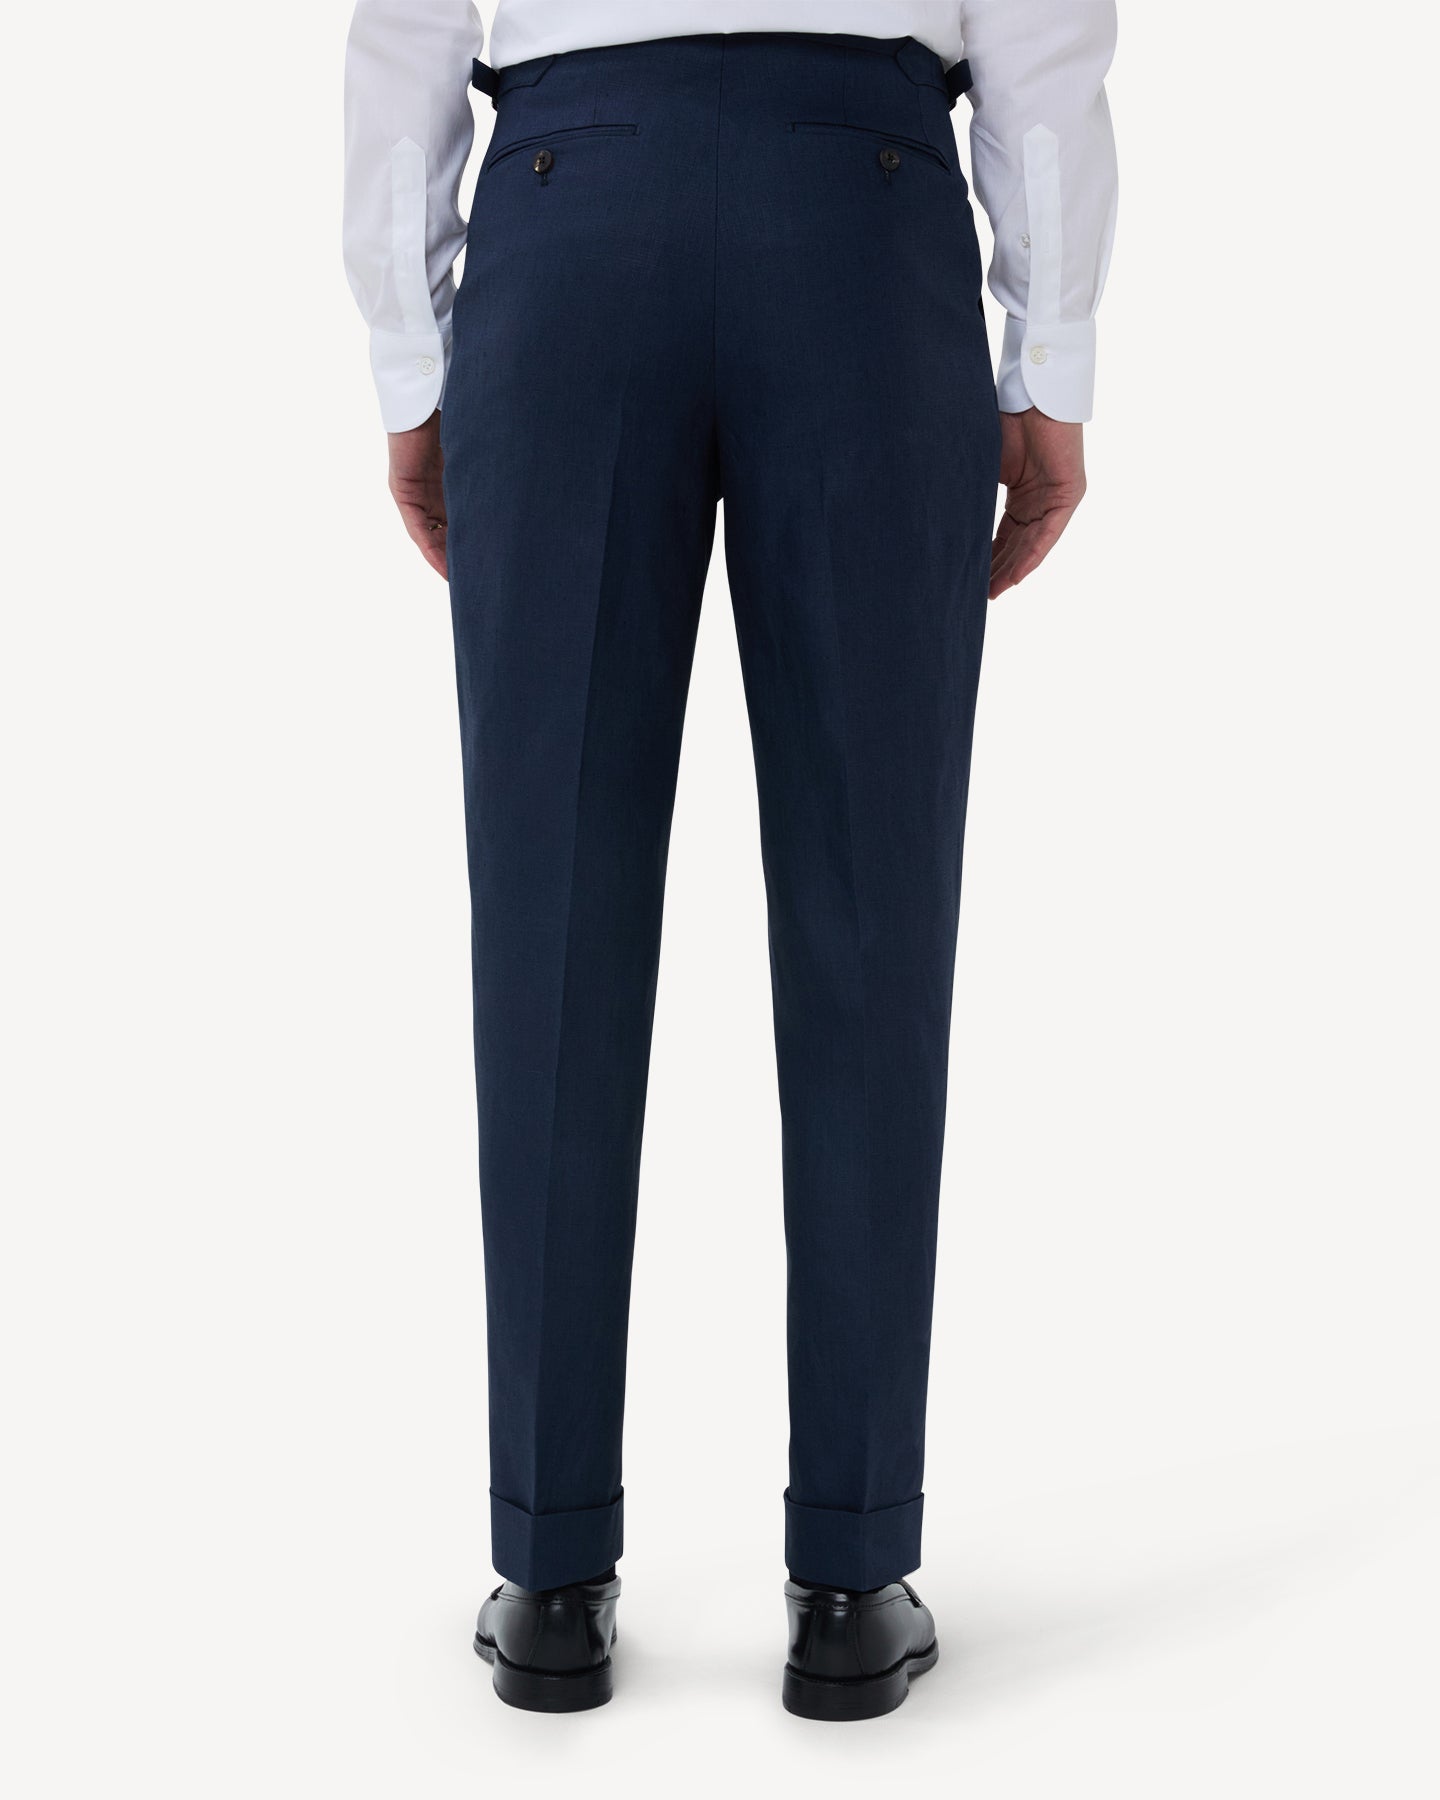 The back of navy linen trousers with single pleats and side adjusters